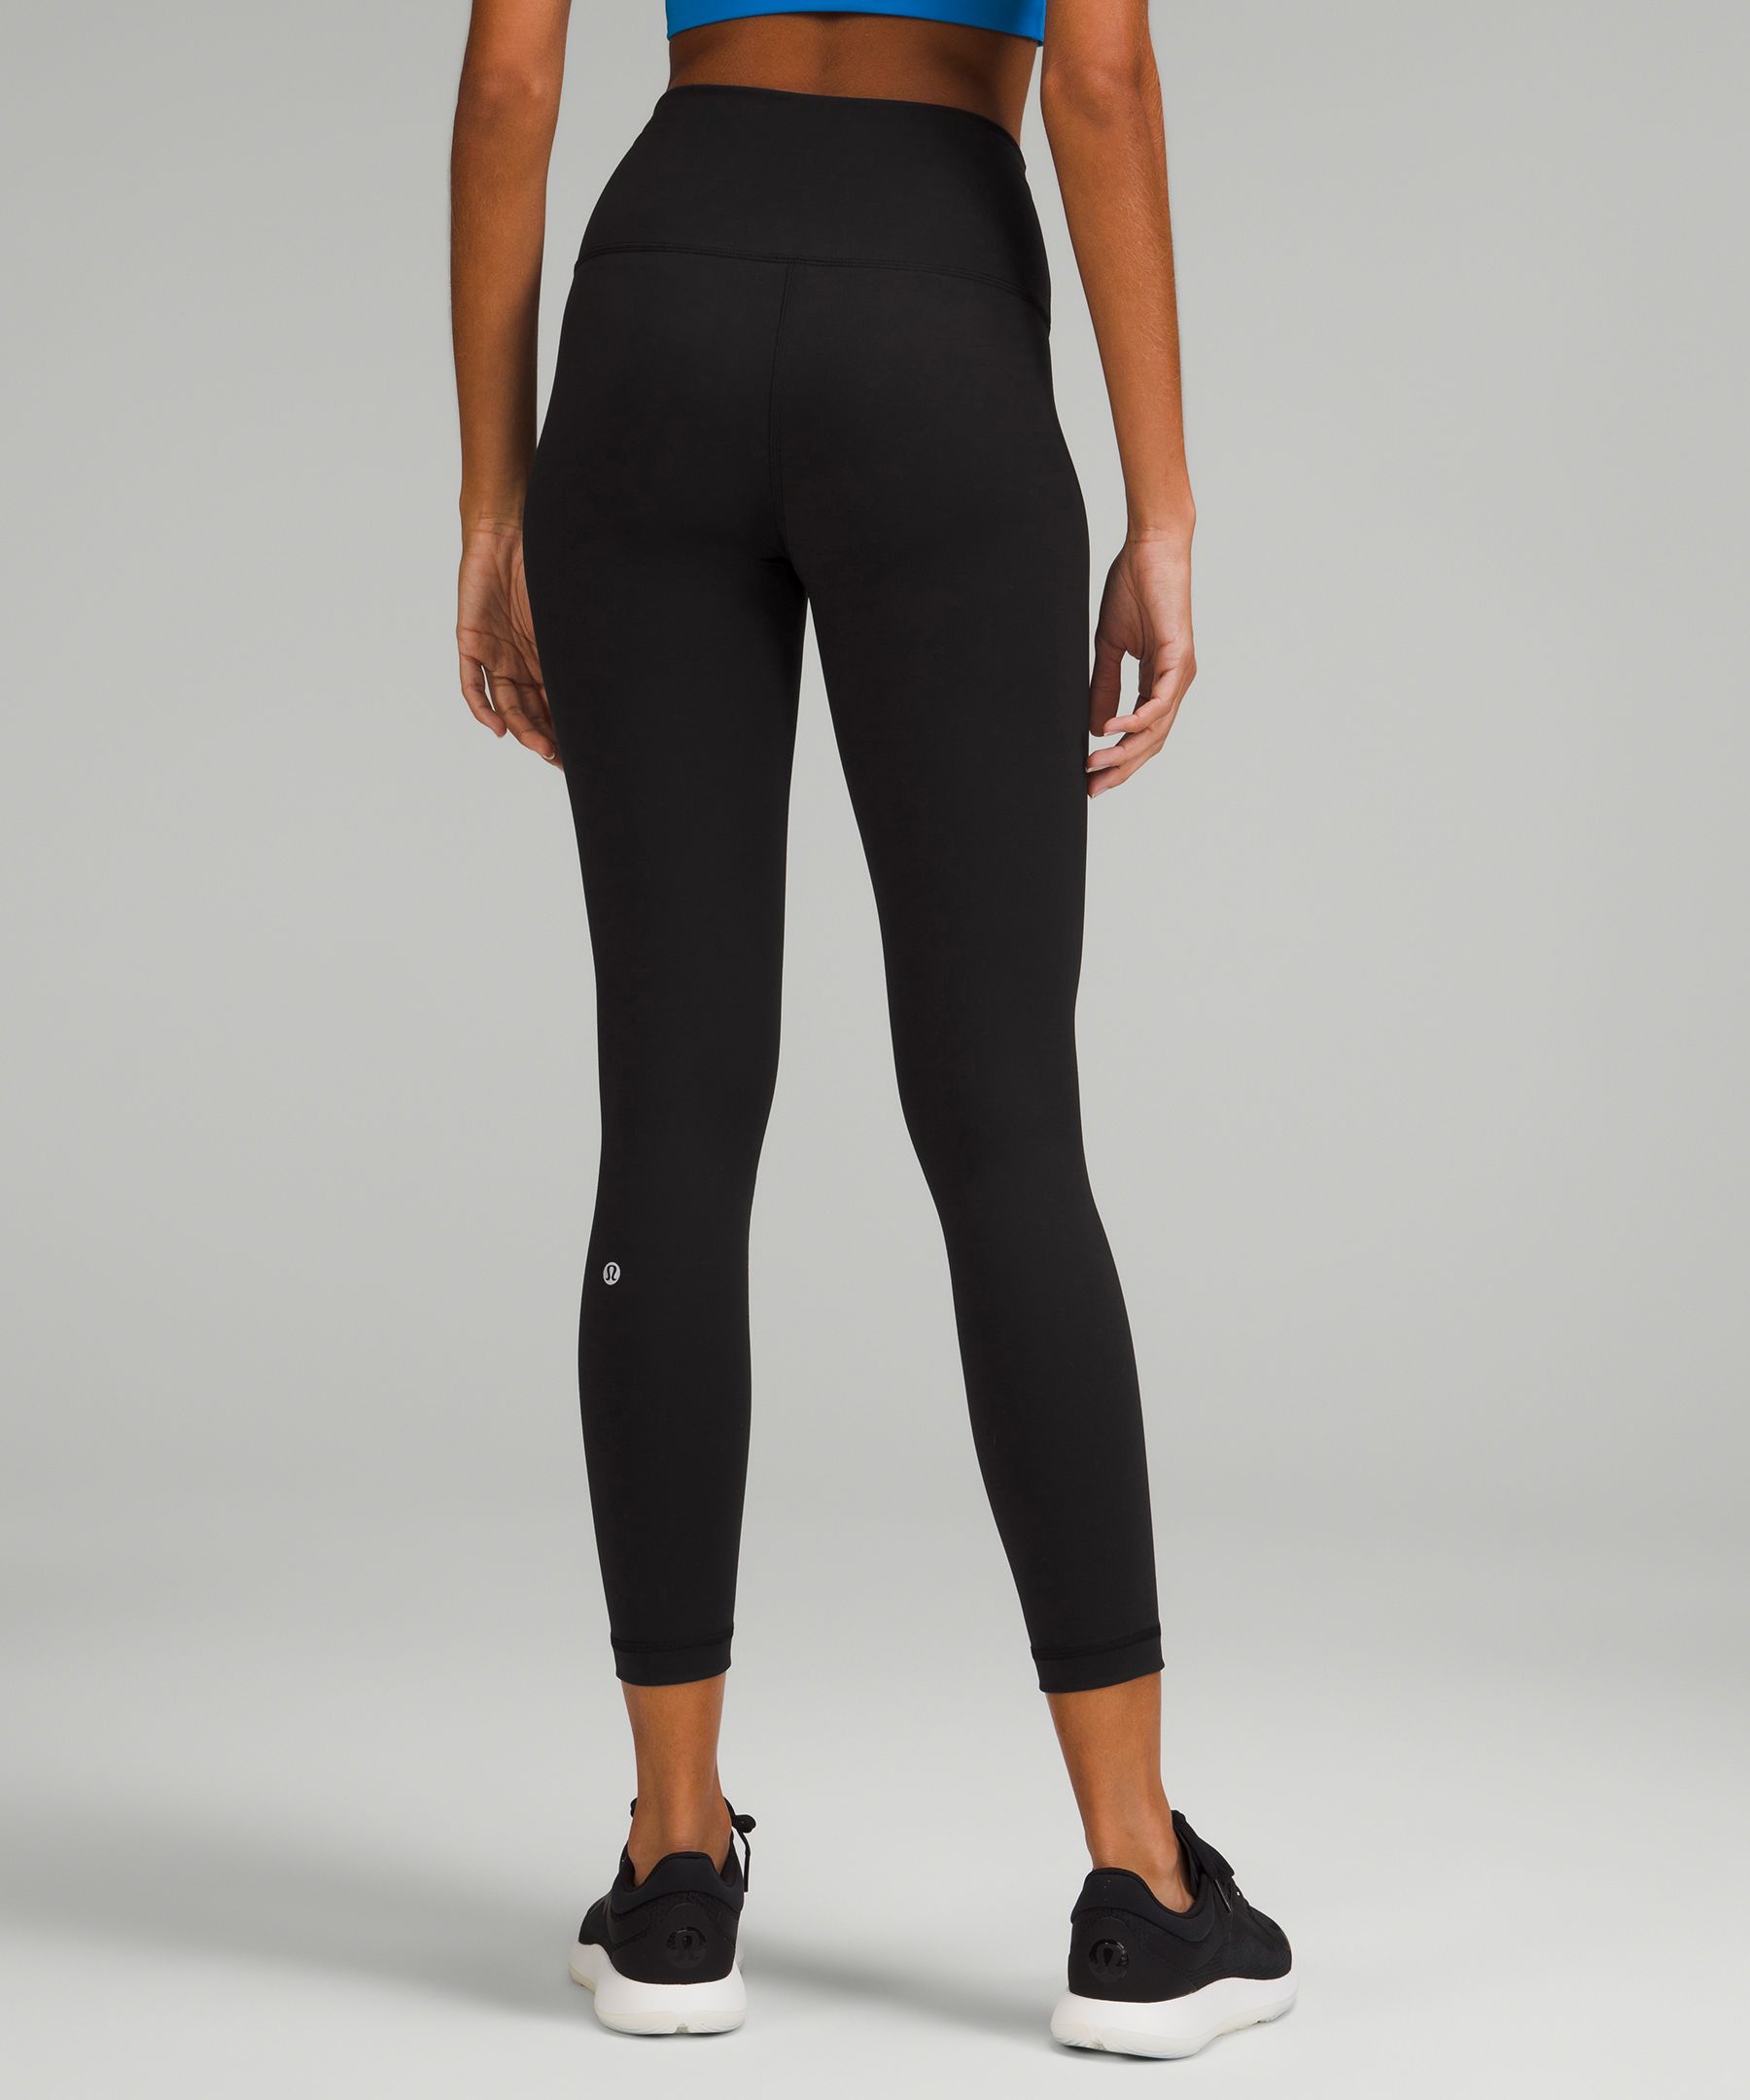 NWOT - !!!SOLD OUT!!! Lululemon Tight Stuff Tight II *25 Black